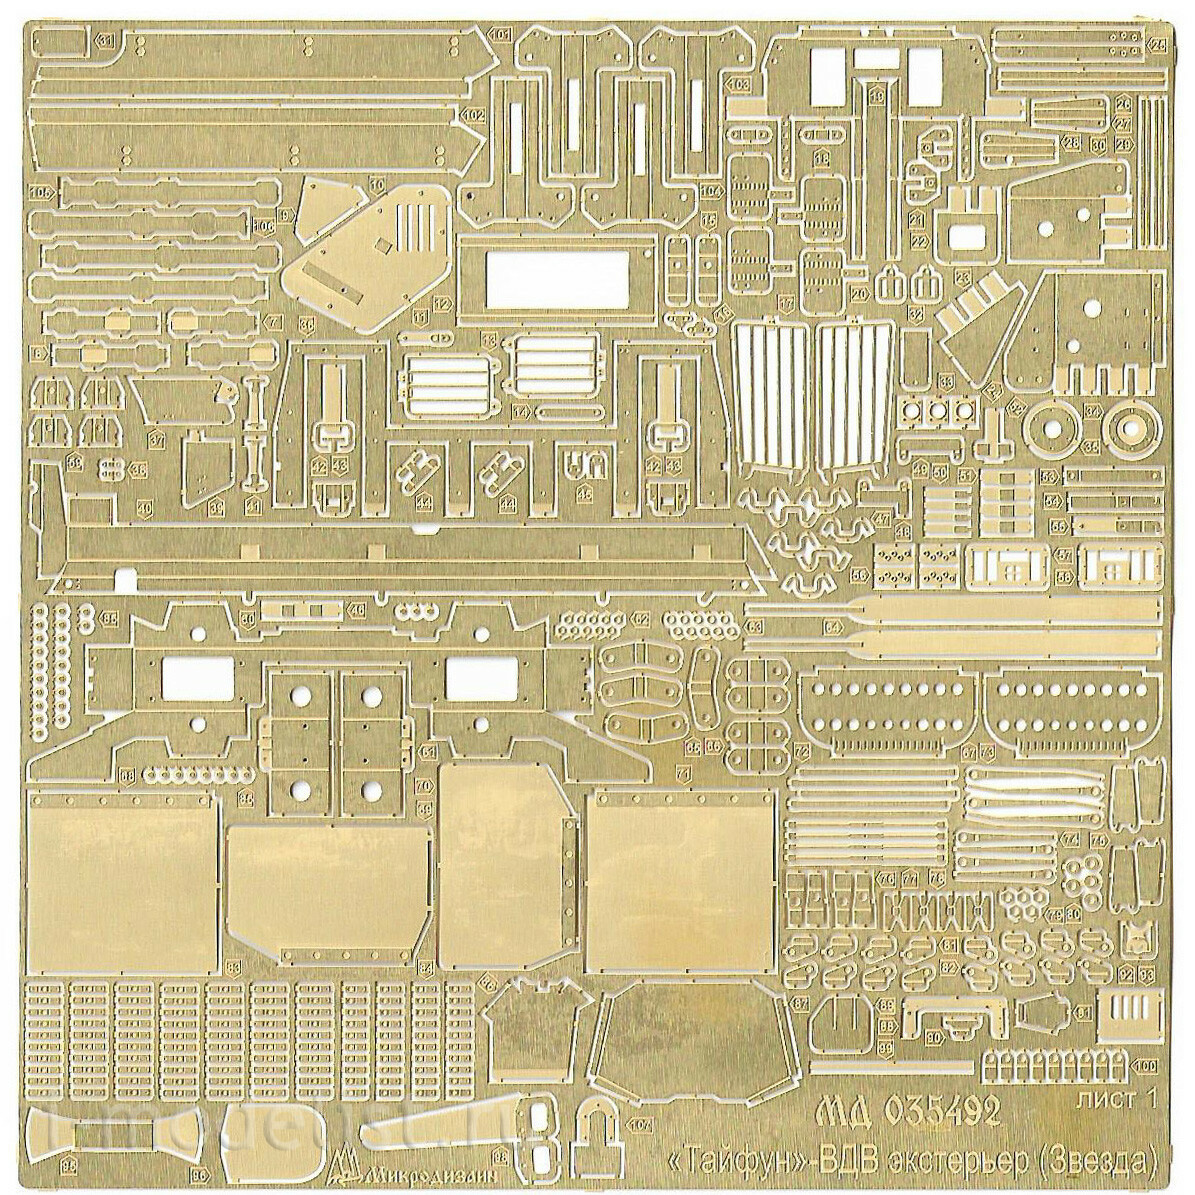 035492 Microdesign 1/35 Exterior photo etching kit for the Zvezda model, art. 3648